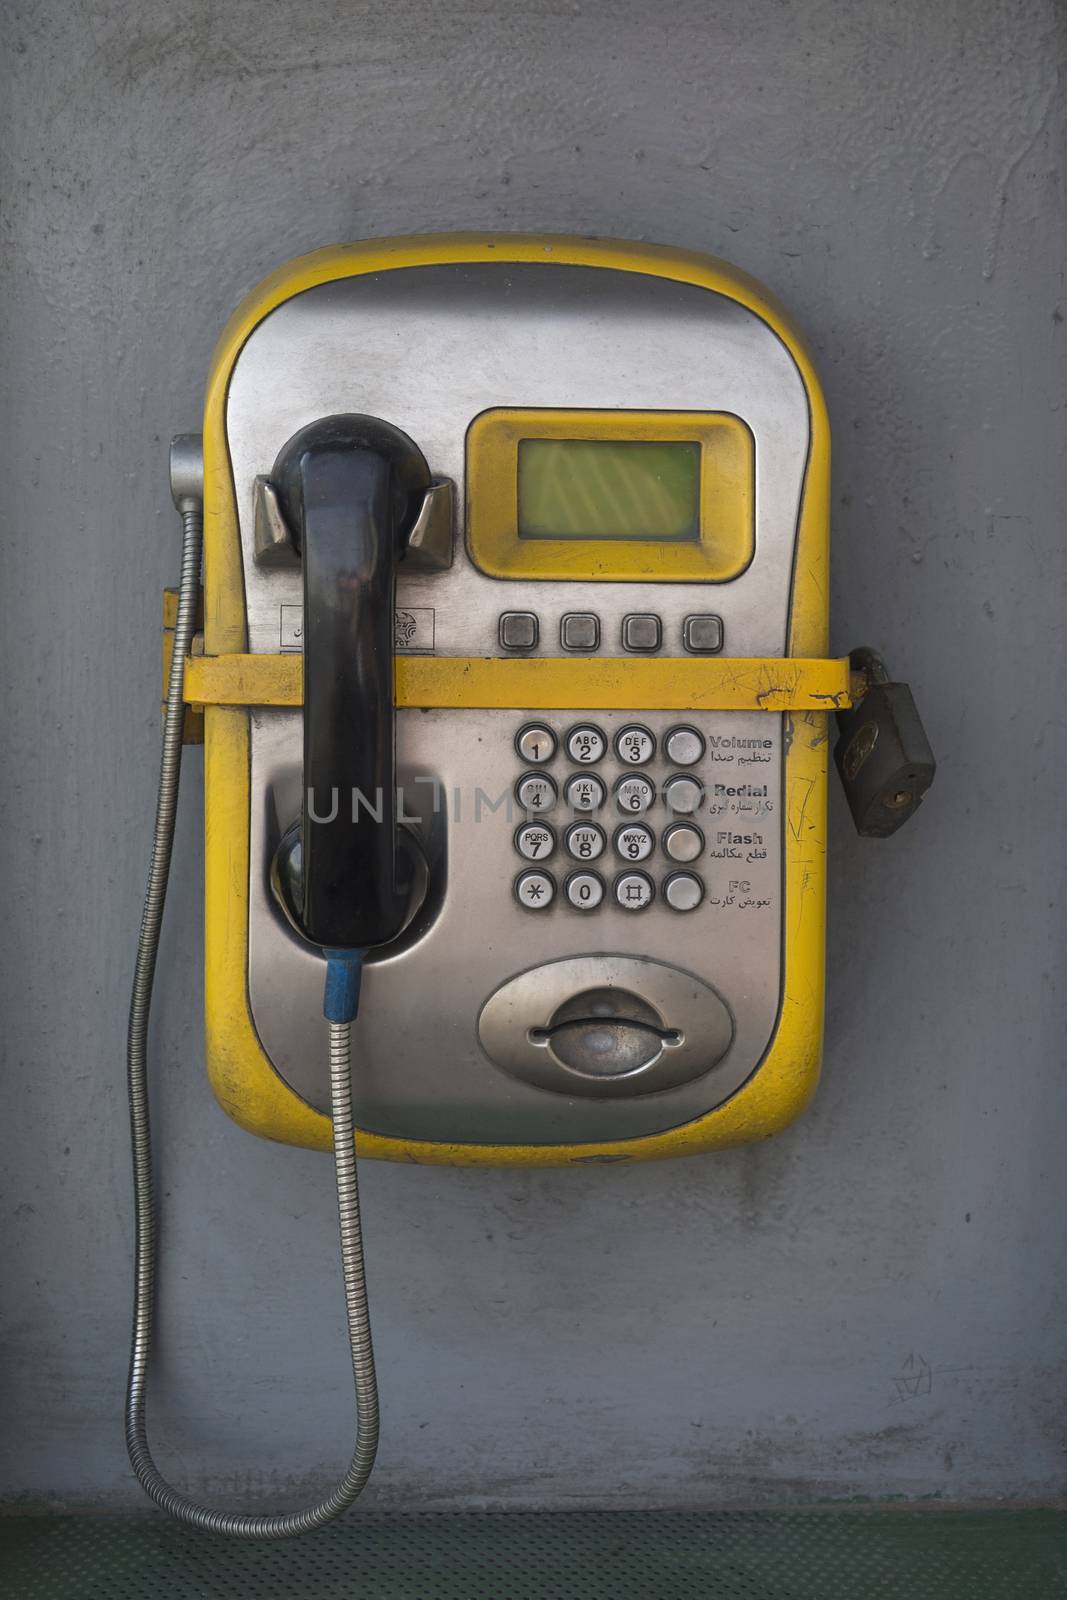 Public phone secured by lock for misusing and rubbery actions.